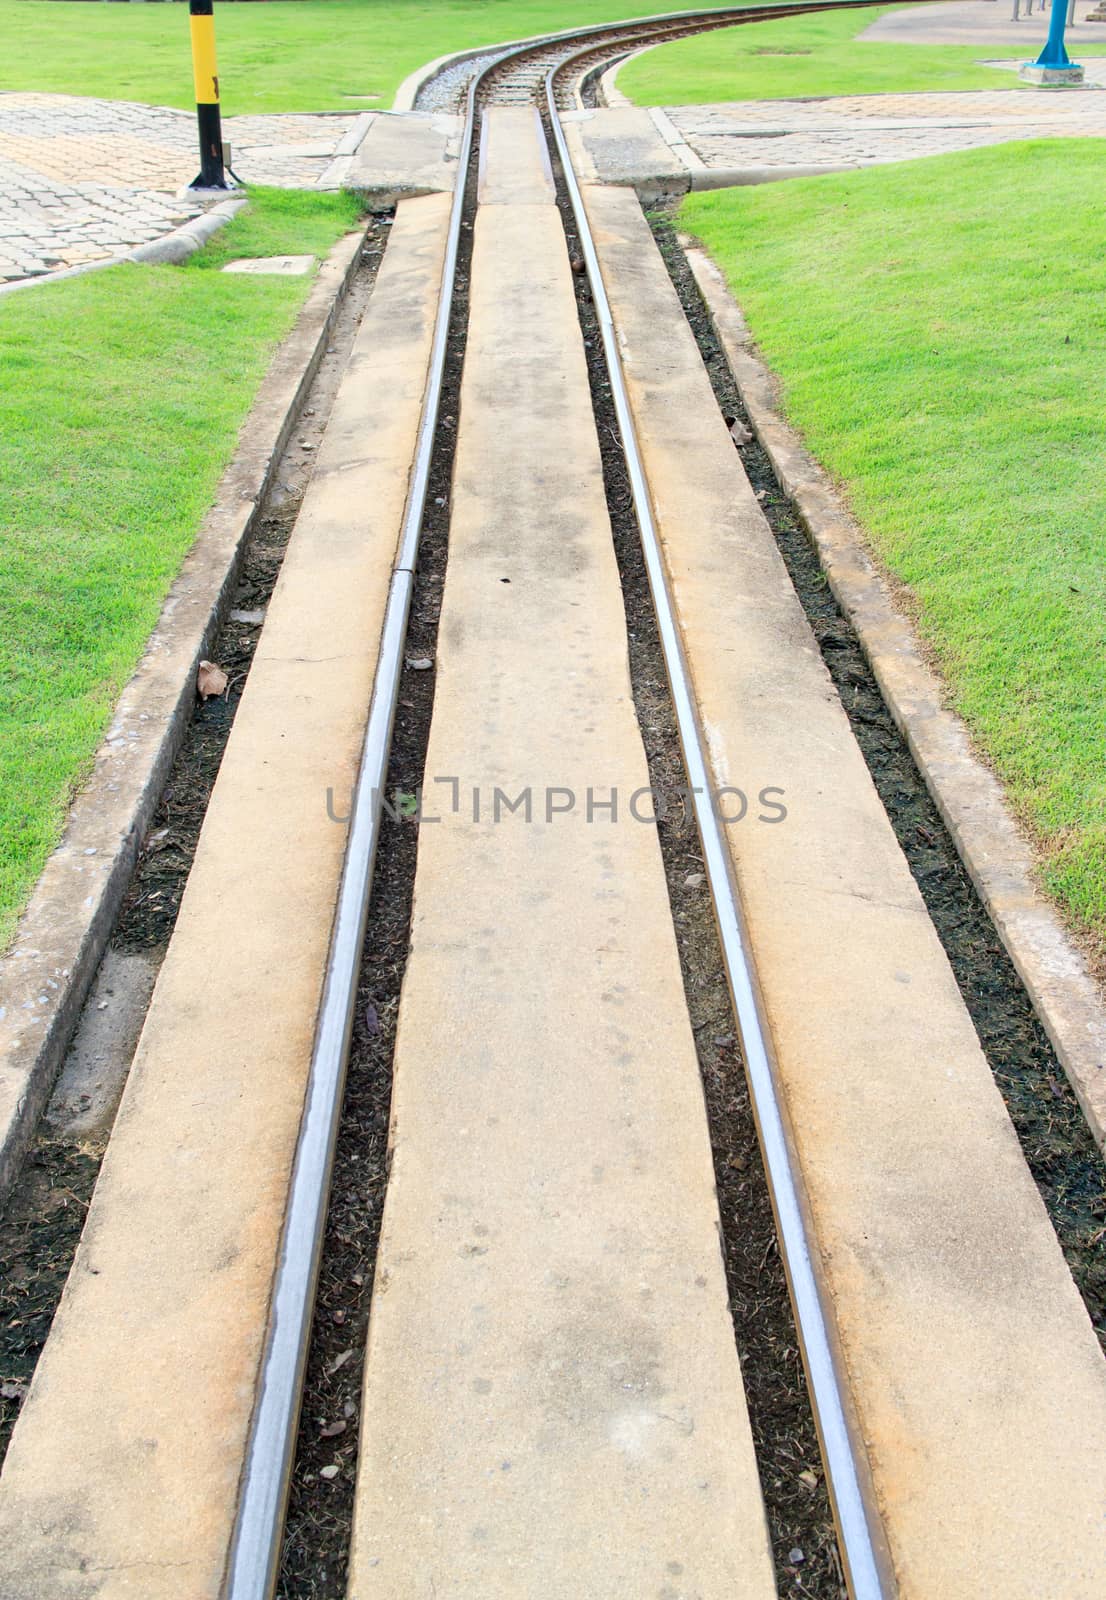 Railroad tracks used for operating small tours.